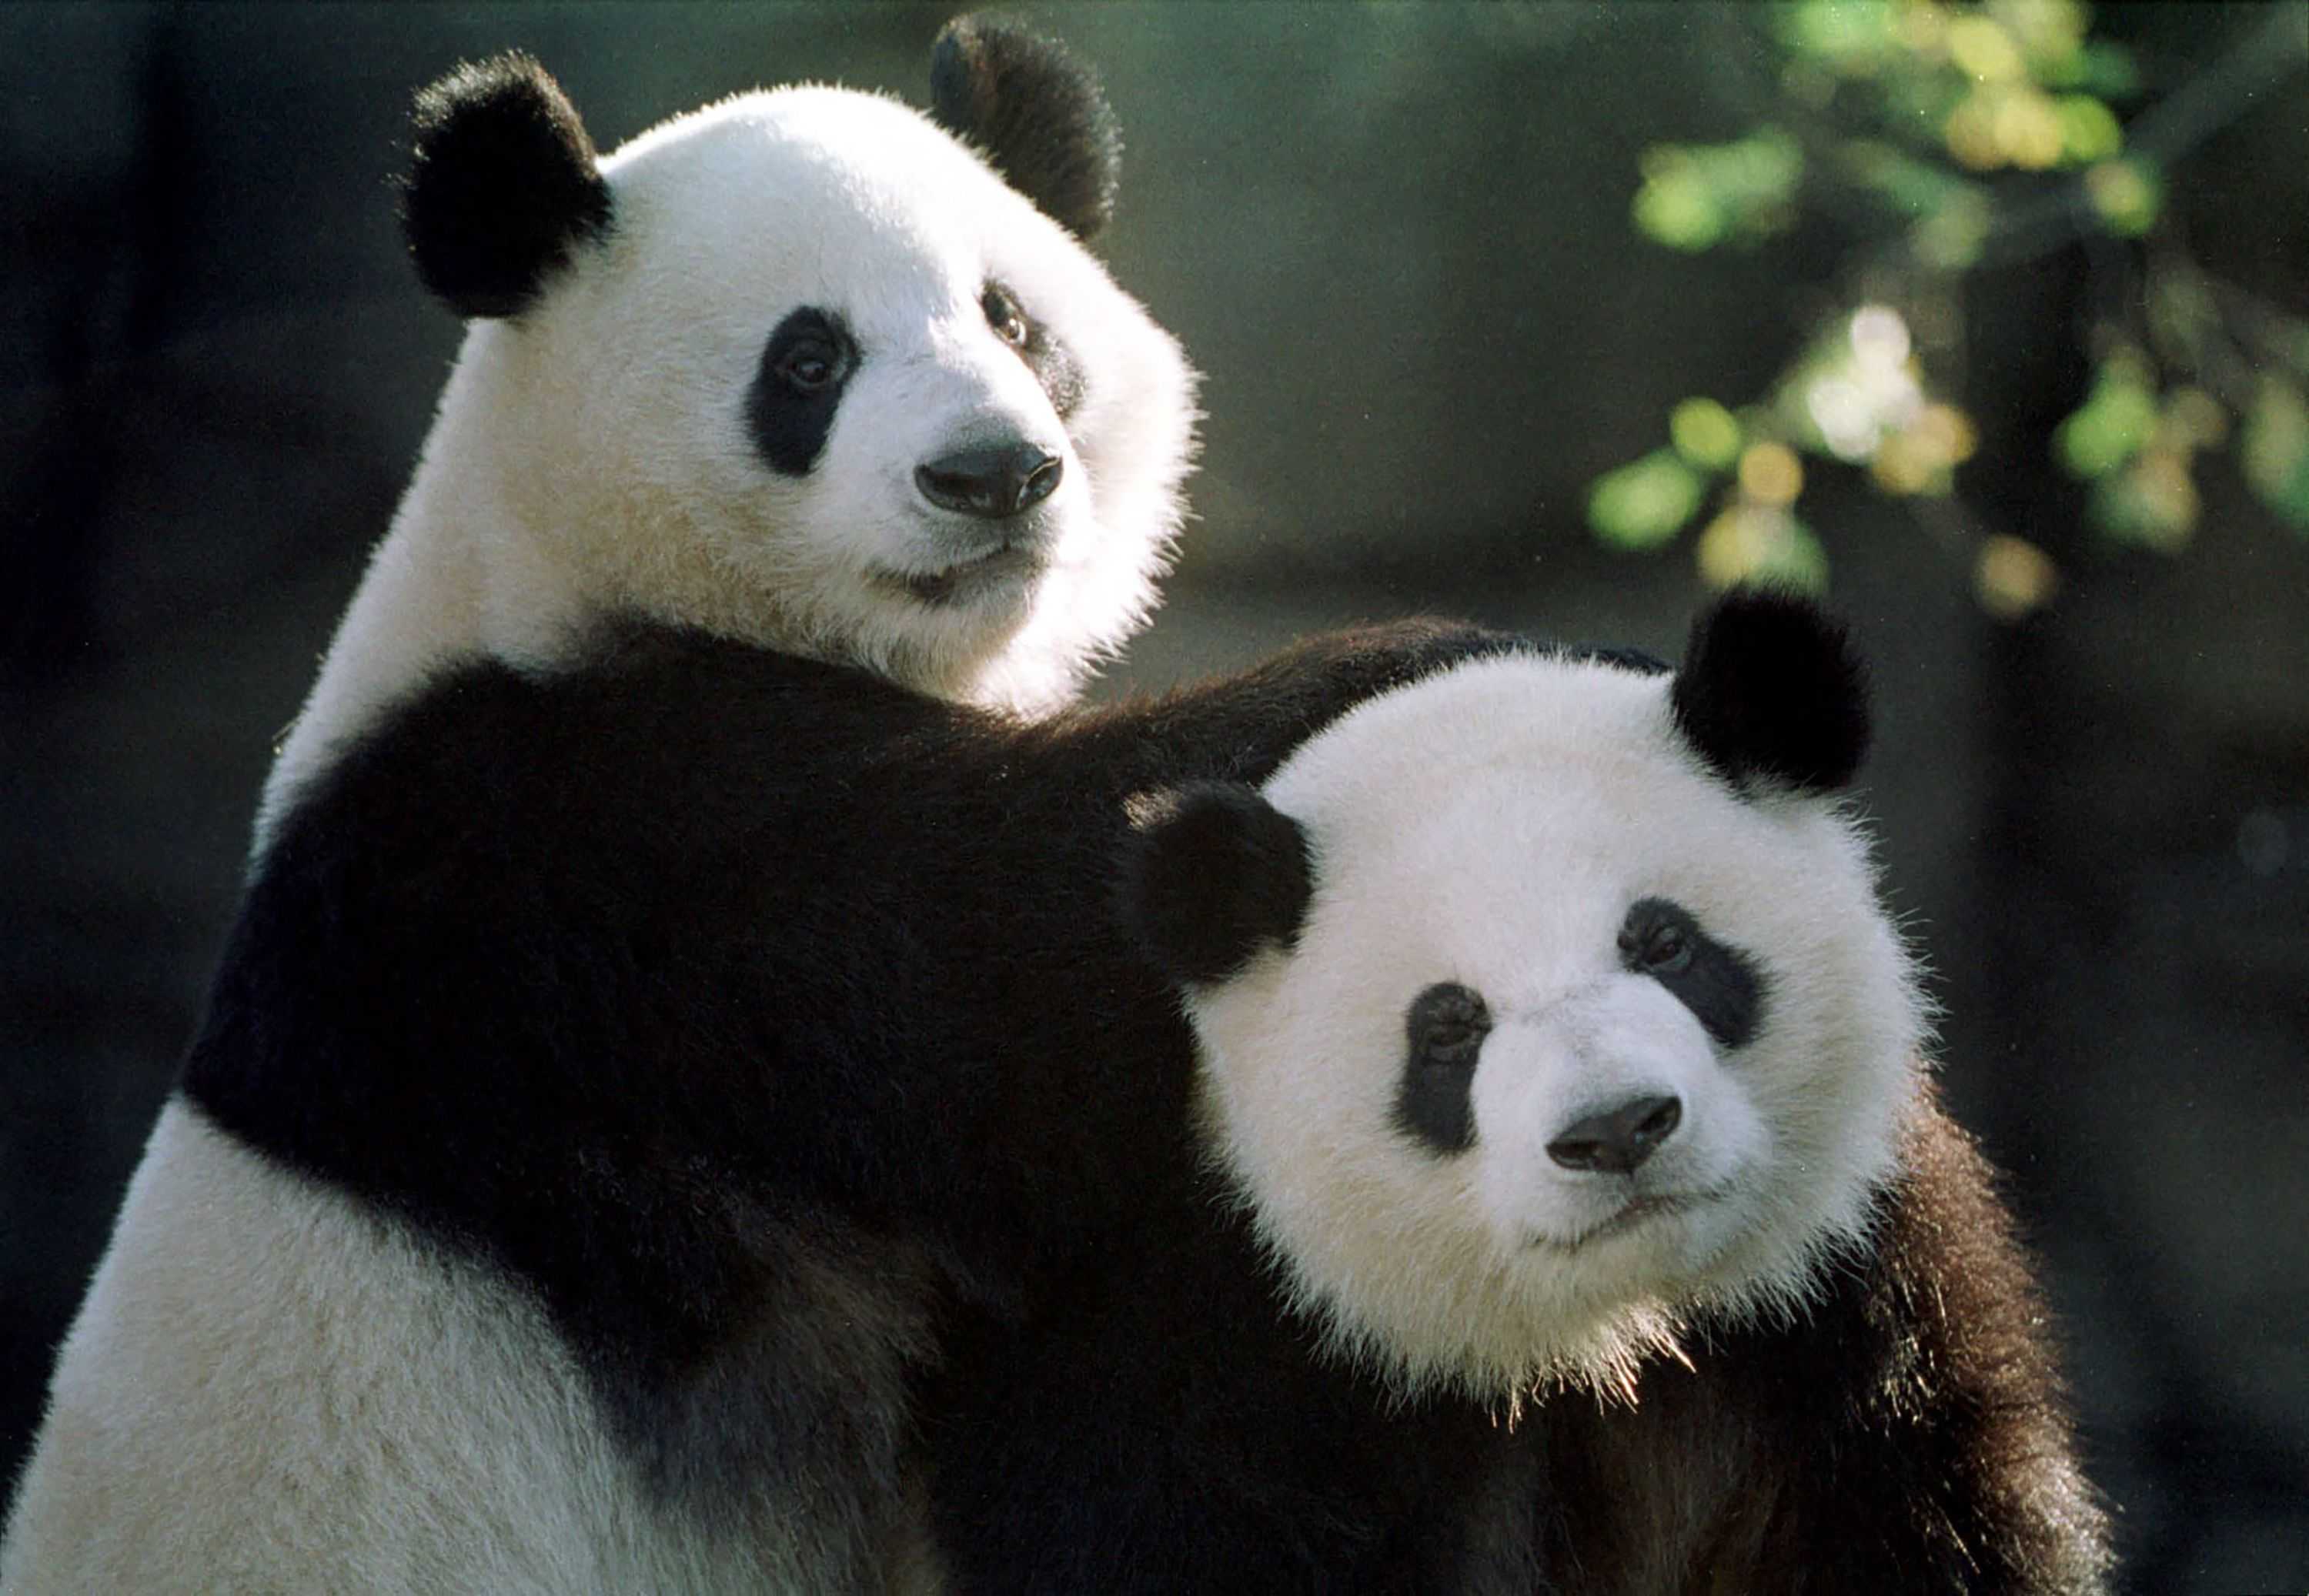 50 Panda Facts to Celebrate 50 Years of Giant Pandas at the Smithsonian's  National Zoo